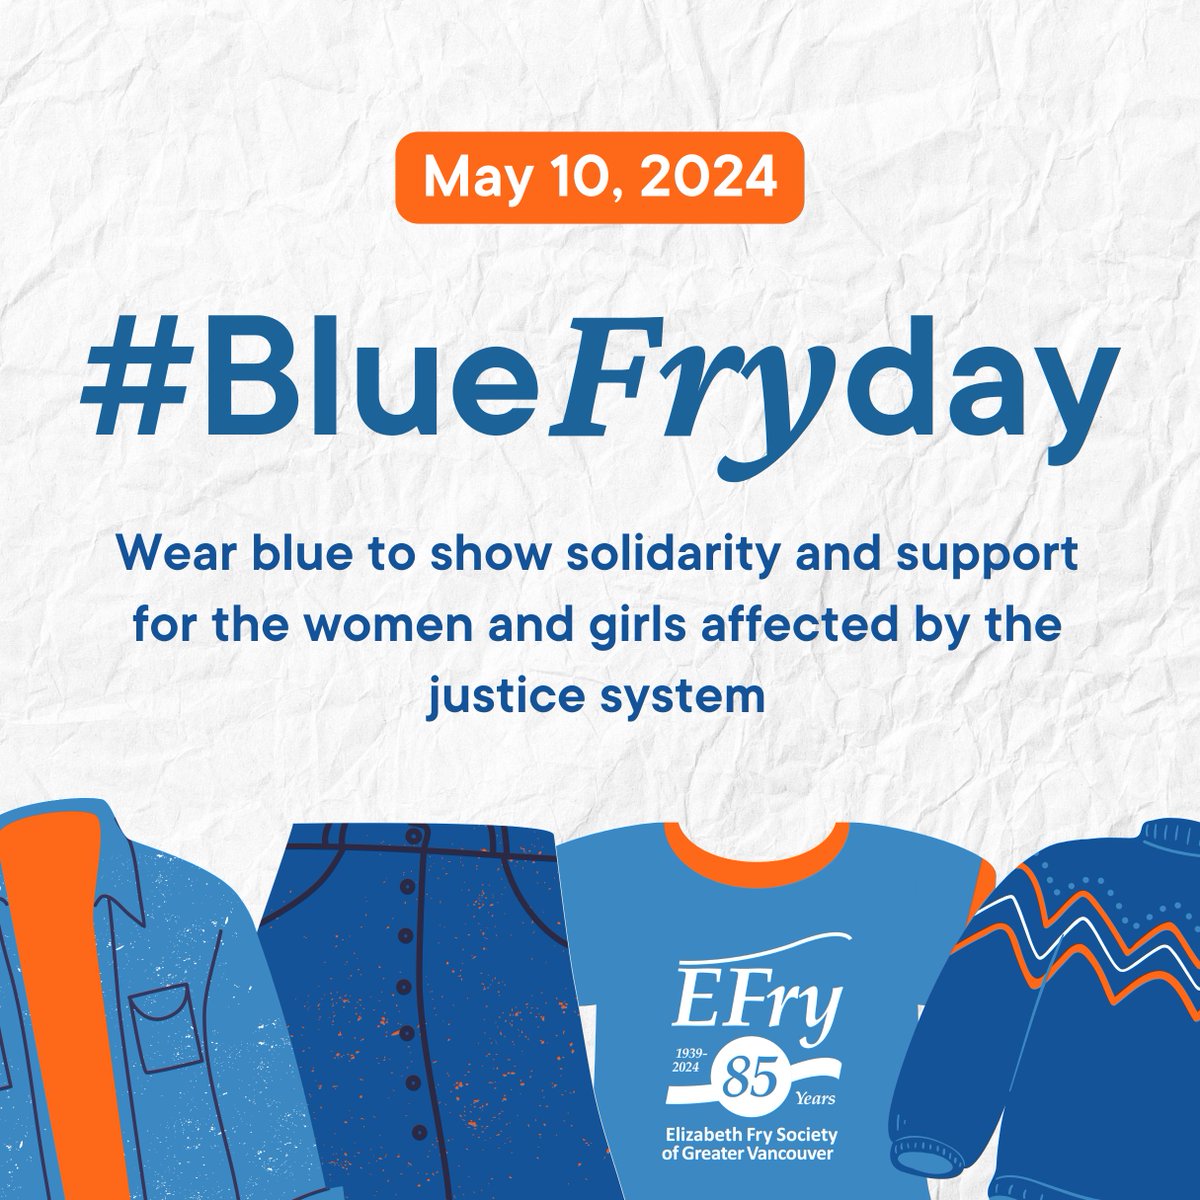 On Friday May 10, show your support by wearing blue and joining our #BlueFryday campaign to stand in solidarity and raise awareness about the critical issues facing women and girls in the justice system. Snap a pic and don't forget to tag us and use the hashtag #BlueFryday! 🧢👕